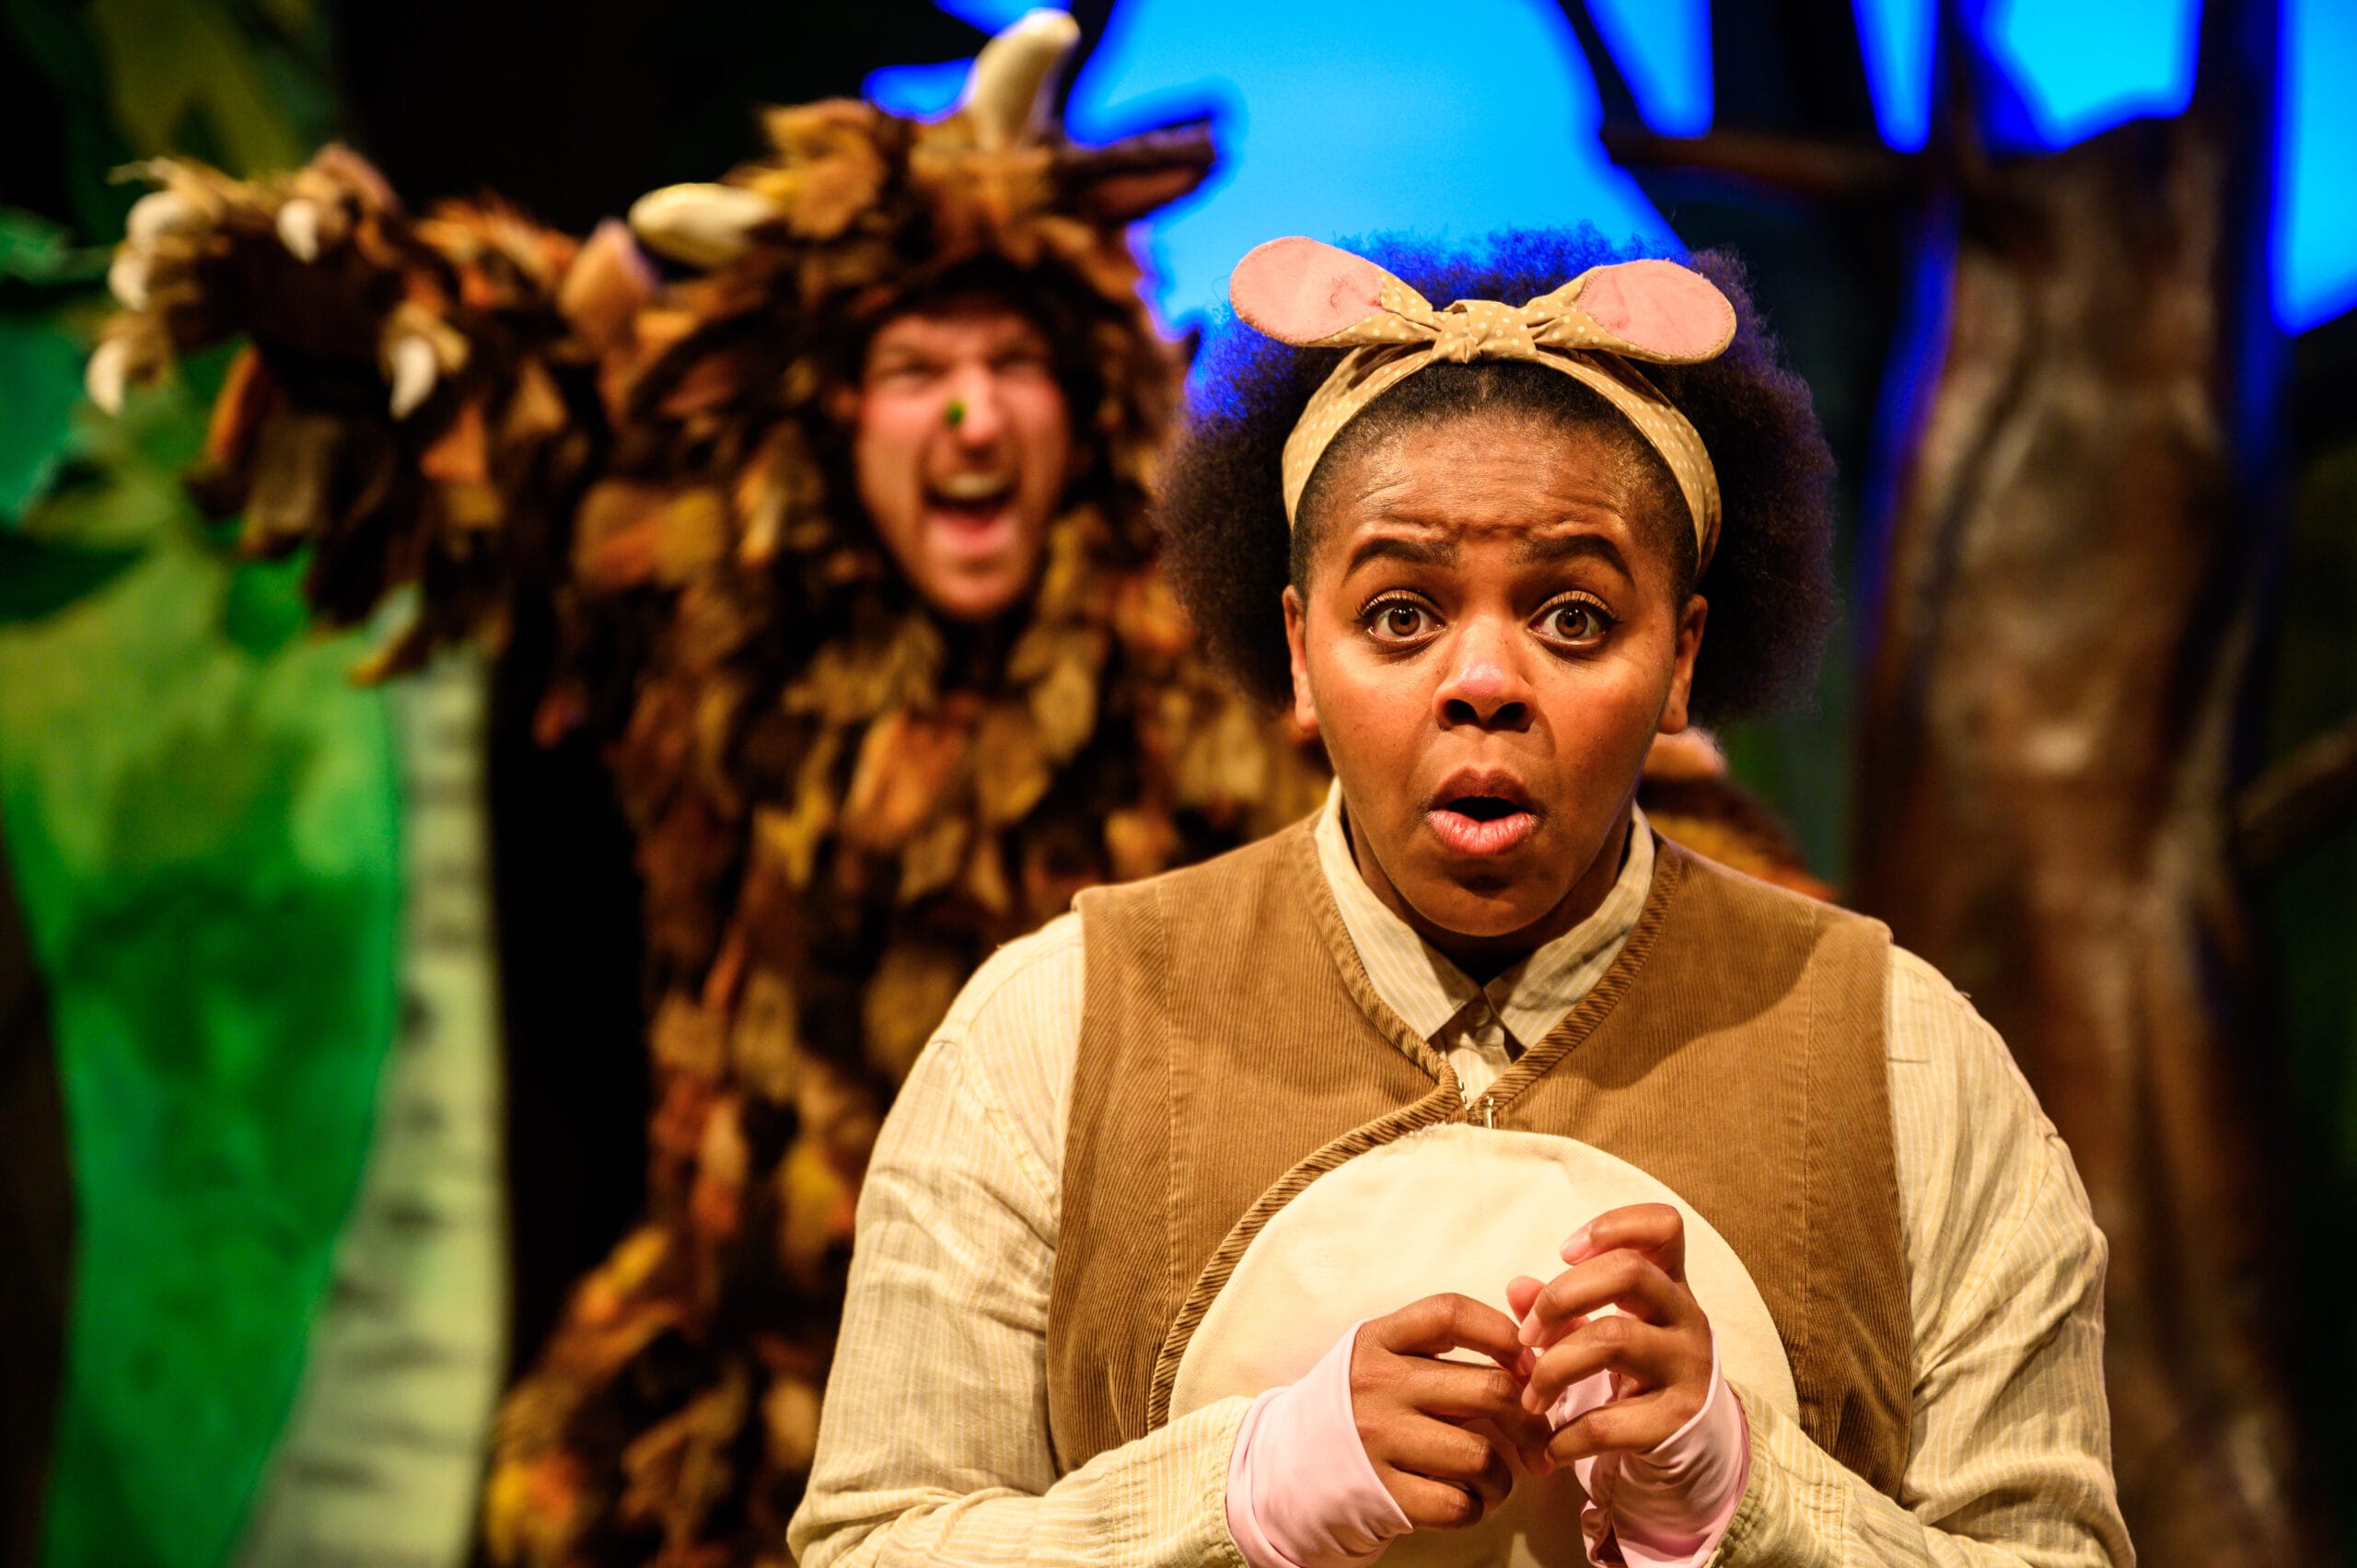 Mouse performer is centre stage. She wears a fawn coloured headband tied in a bow to look like mouse ears, accompanied by a brown and beige costume. She has an anxious expression and hands clasped together, whilst the Gruffalo creeps up behind her in the background of the image.